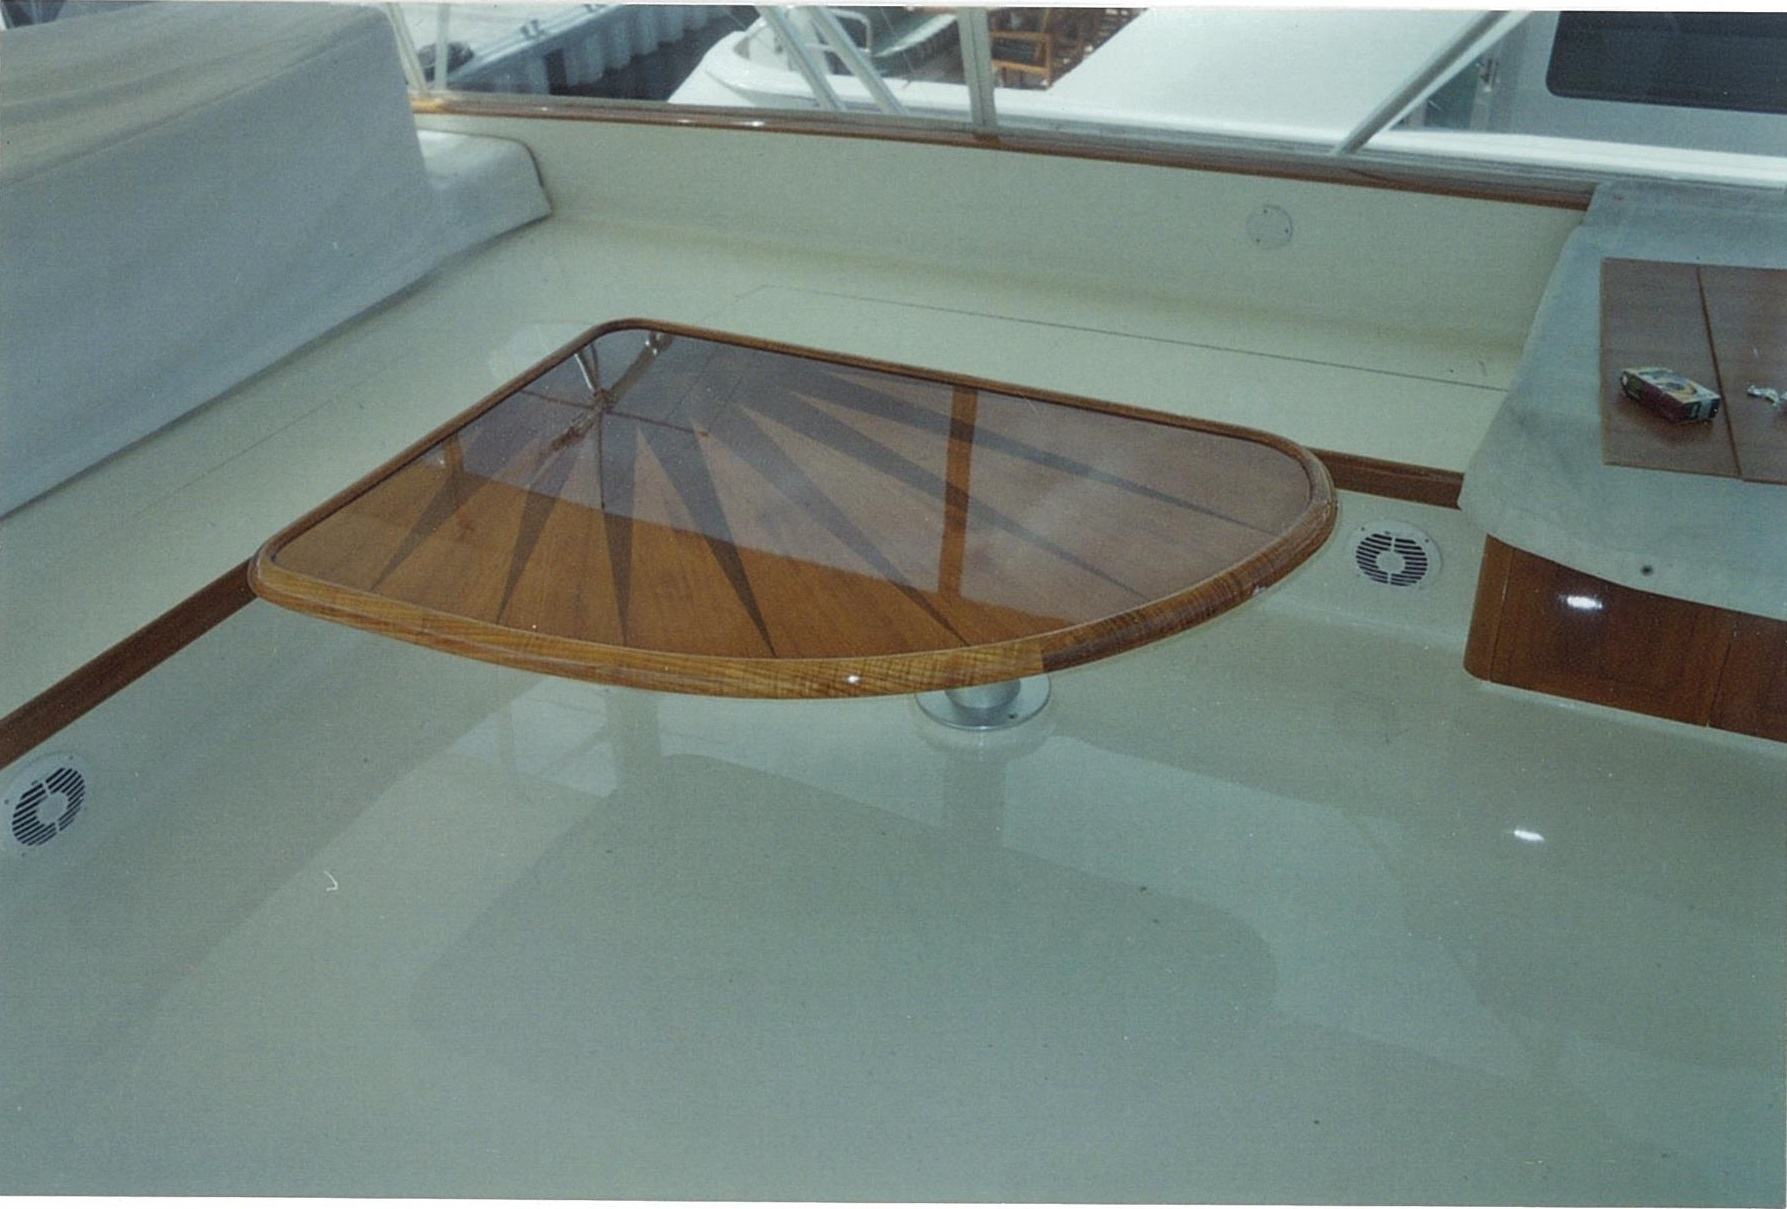 Boat tables matched to fit existing furniture